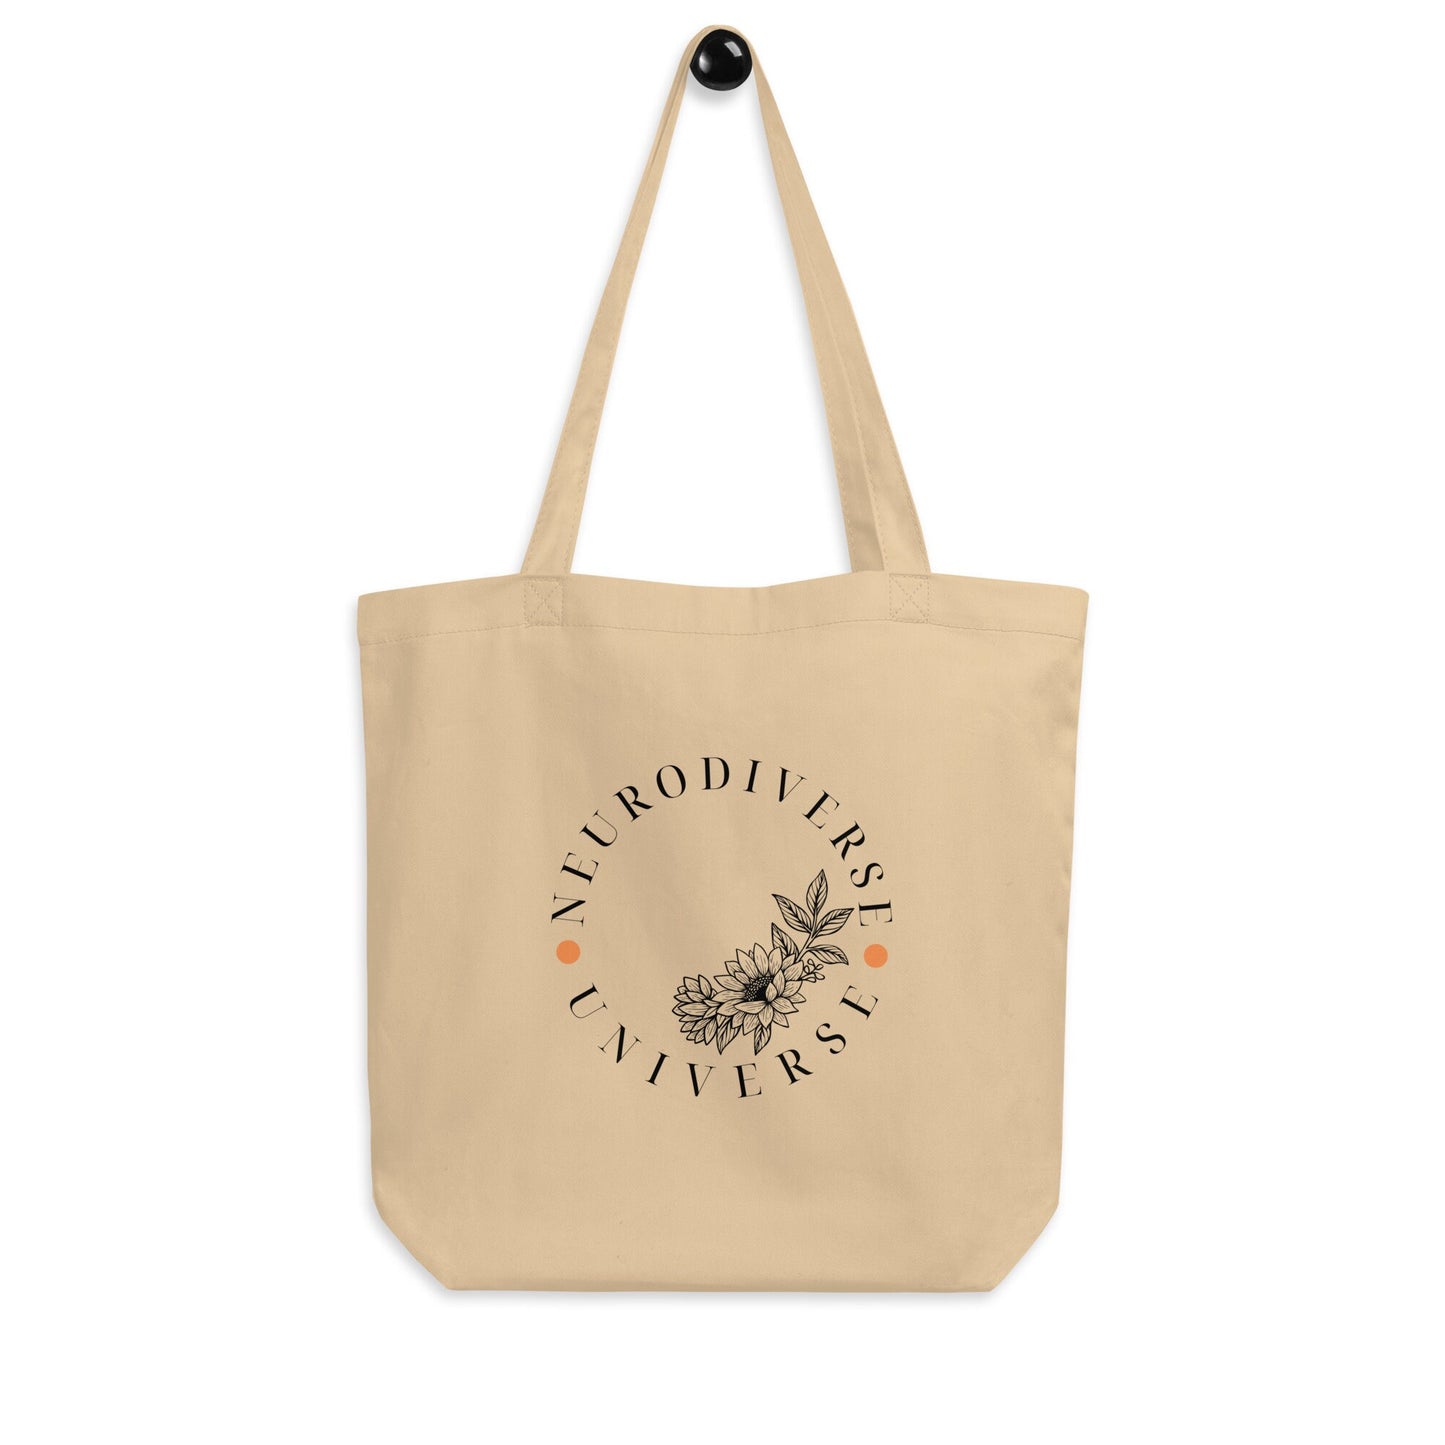 Mental Health Tote Bag &#39;Neurodiverse Universe&#39;, part of profit donated to Mental Health Charity, Autism, ADHD, Asperger, Neurodiversity